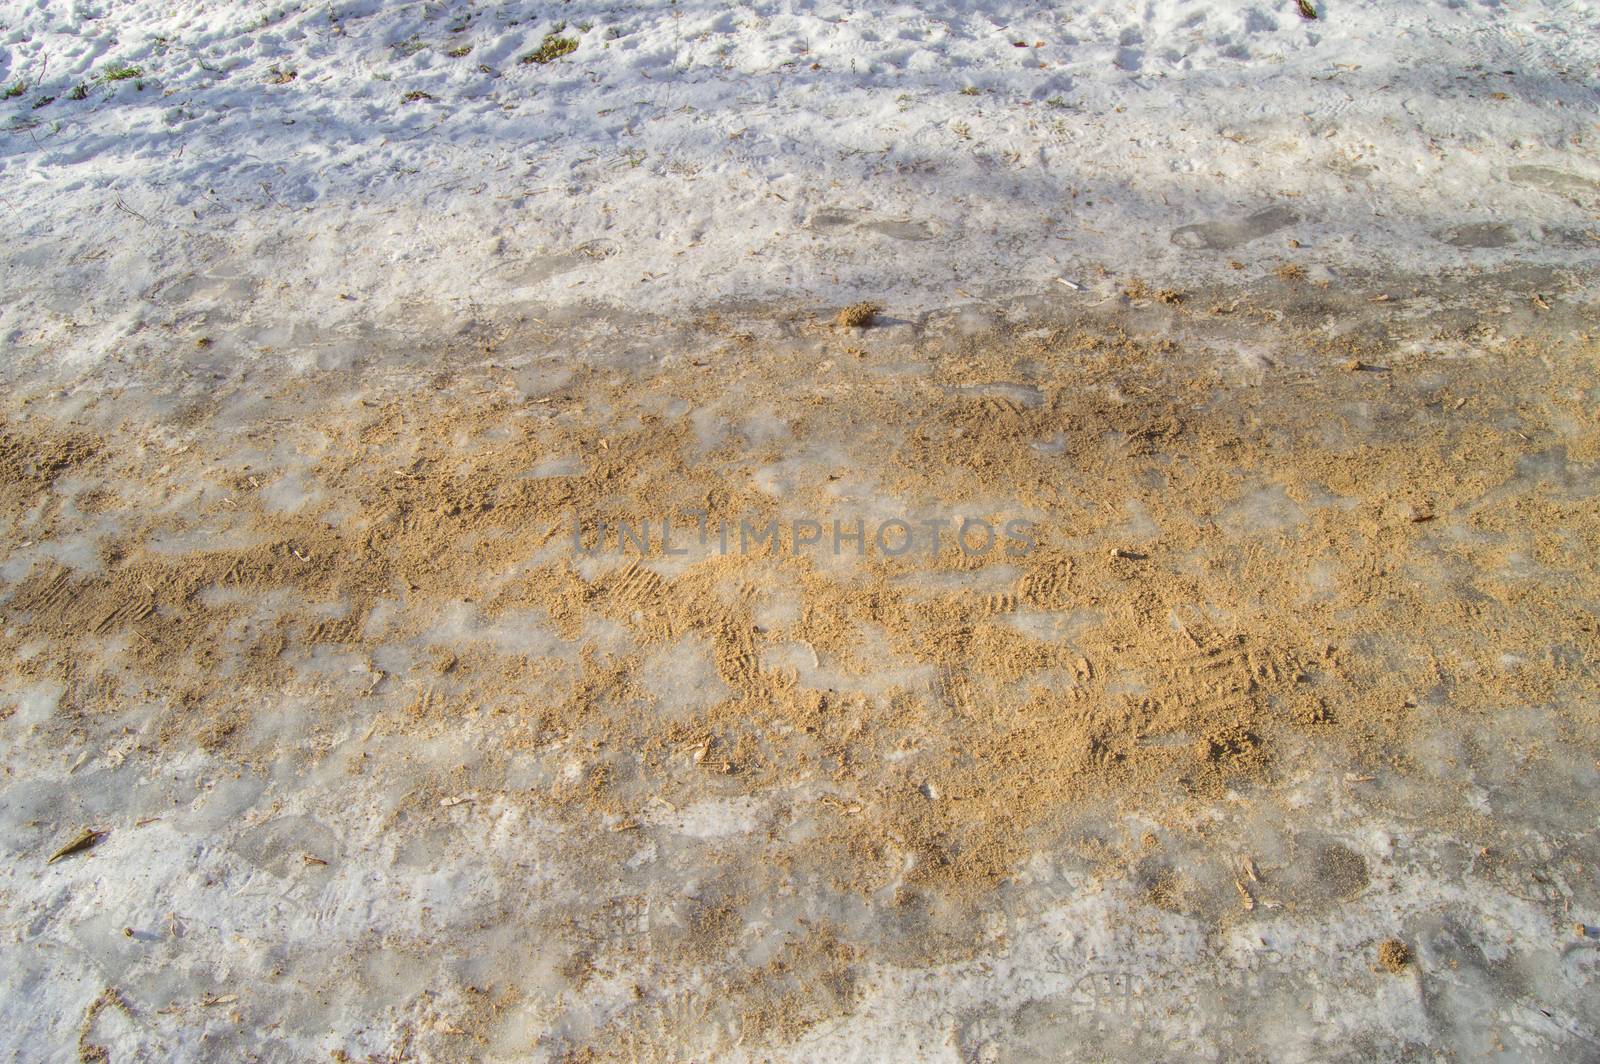 Anti-icing agent and sand on the footpath covered with ice by claire_lucia